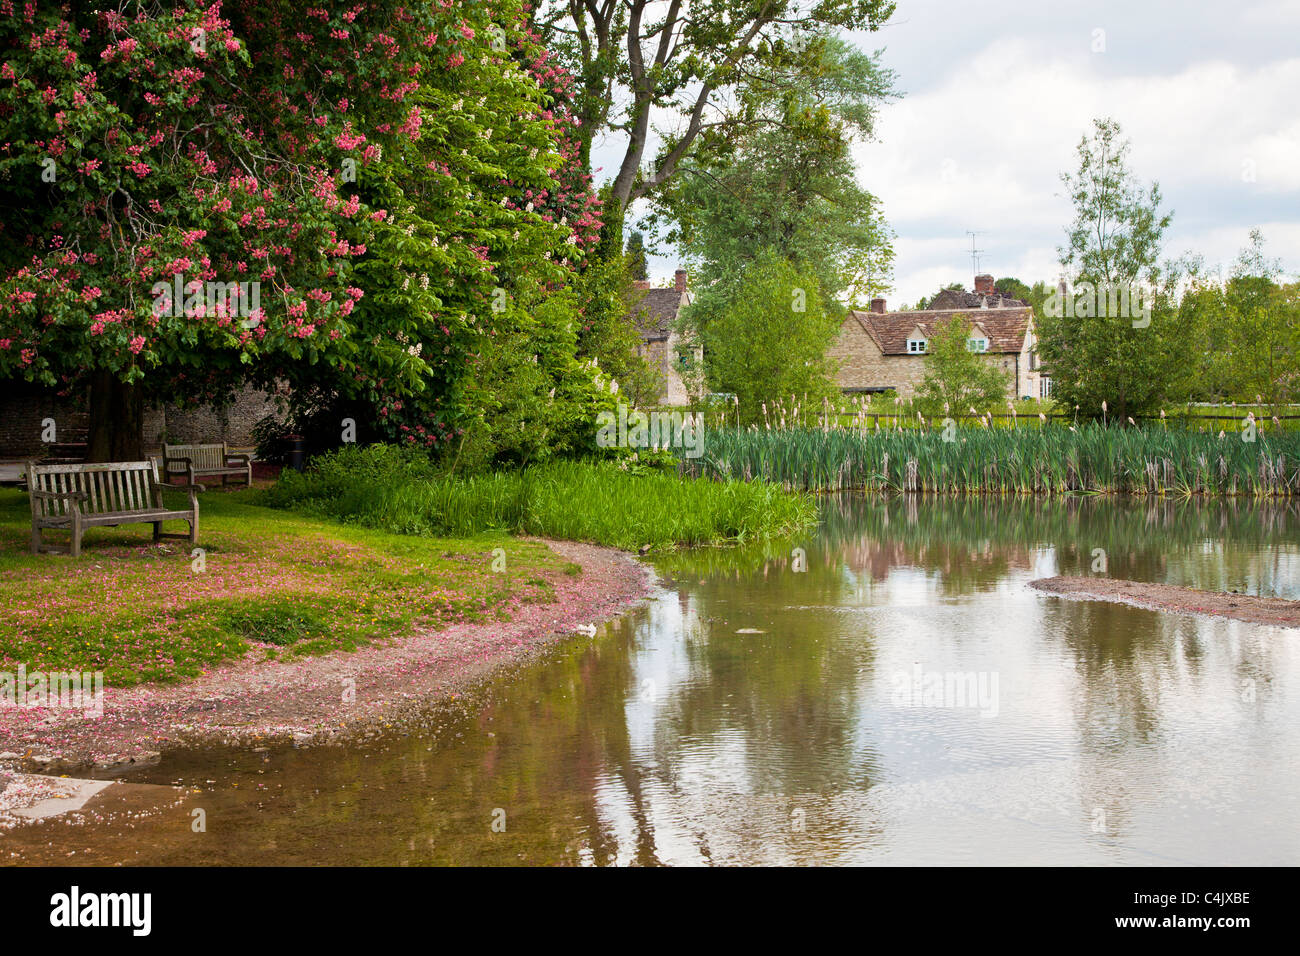 The pond in the pretty Cotswold village of Shilton, Oxfordshire, England, UK on a sunny day in spring Stock Photo